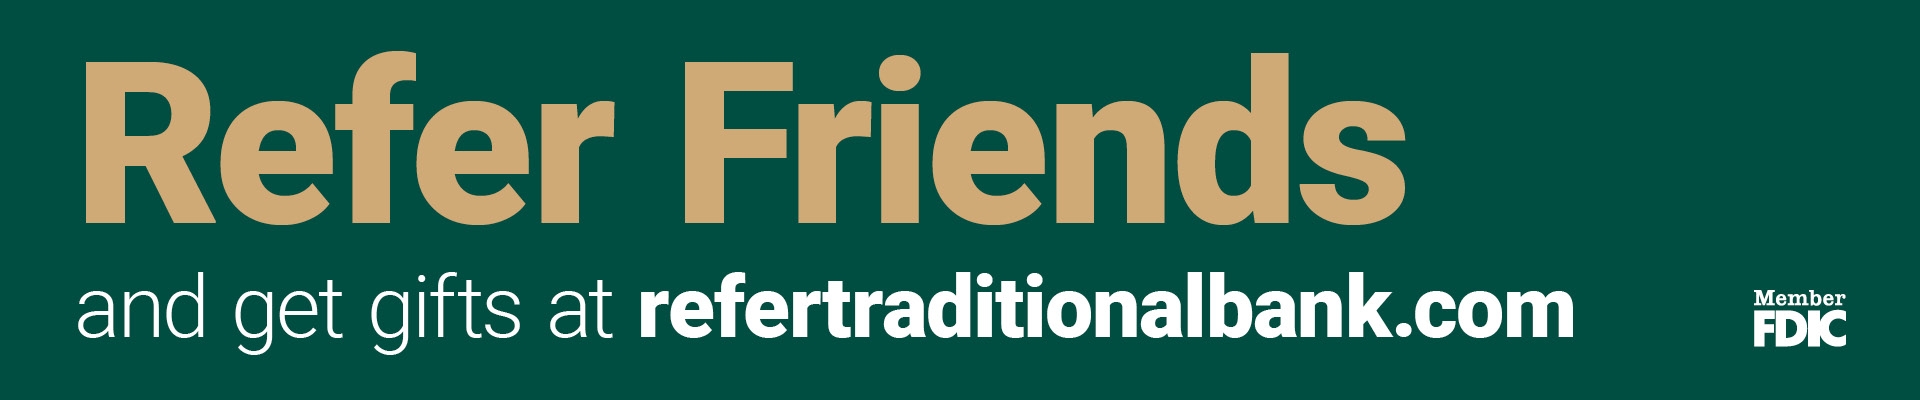 Refer Friends and get gifts at refertraditionalbank.com Banner